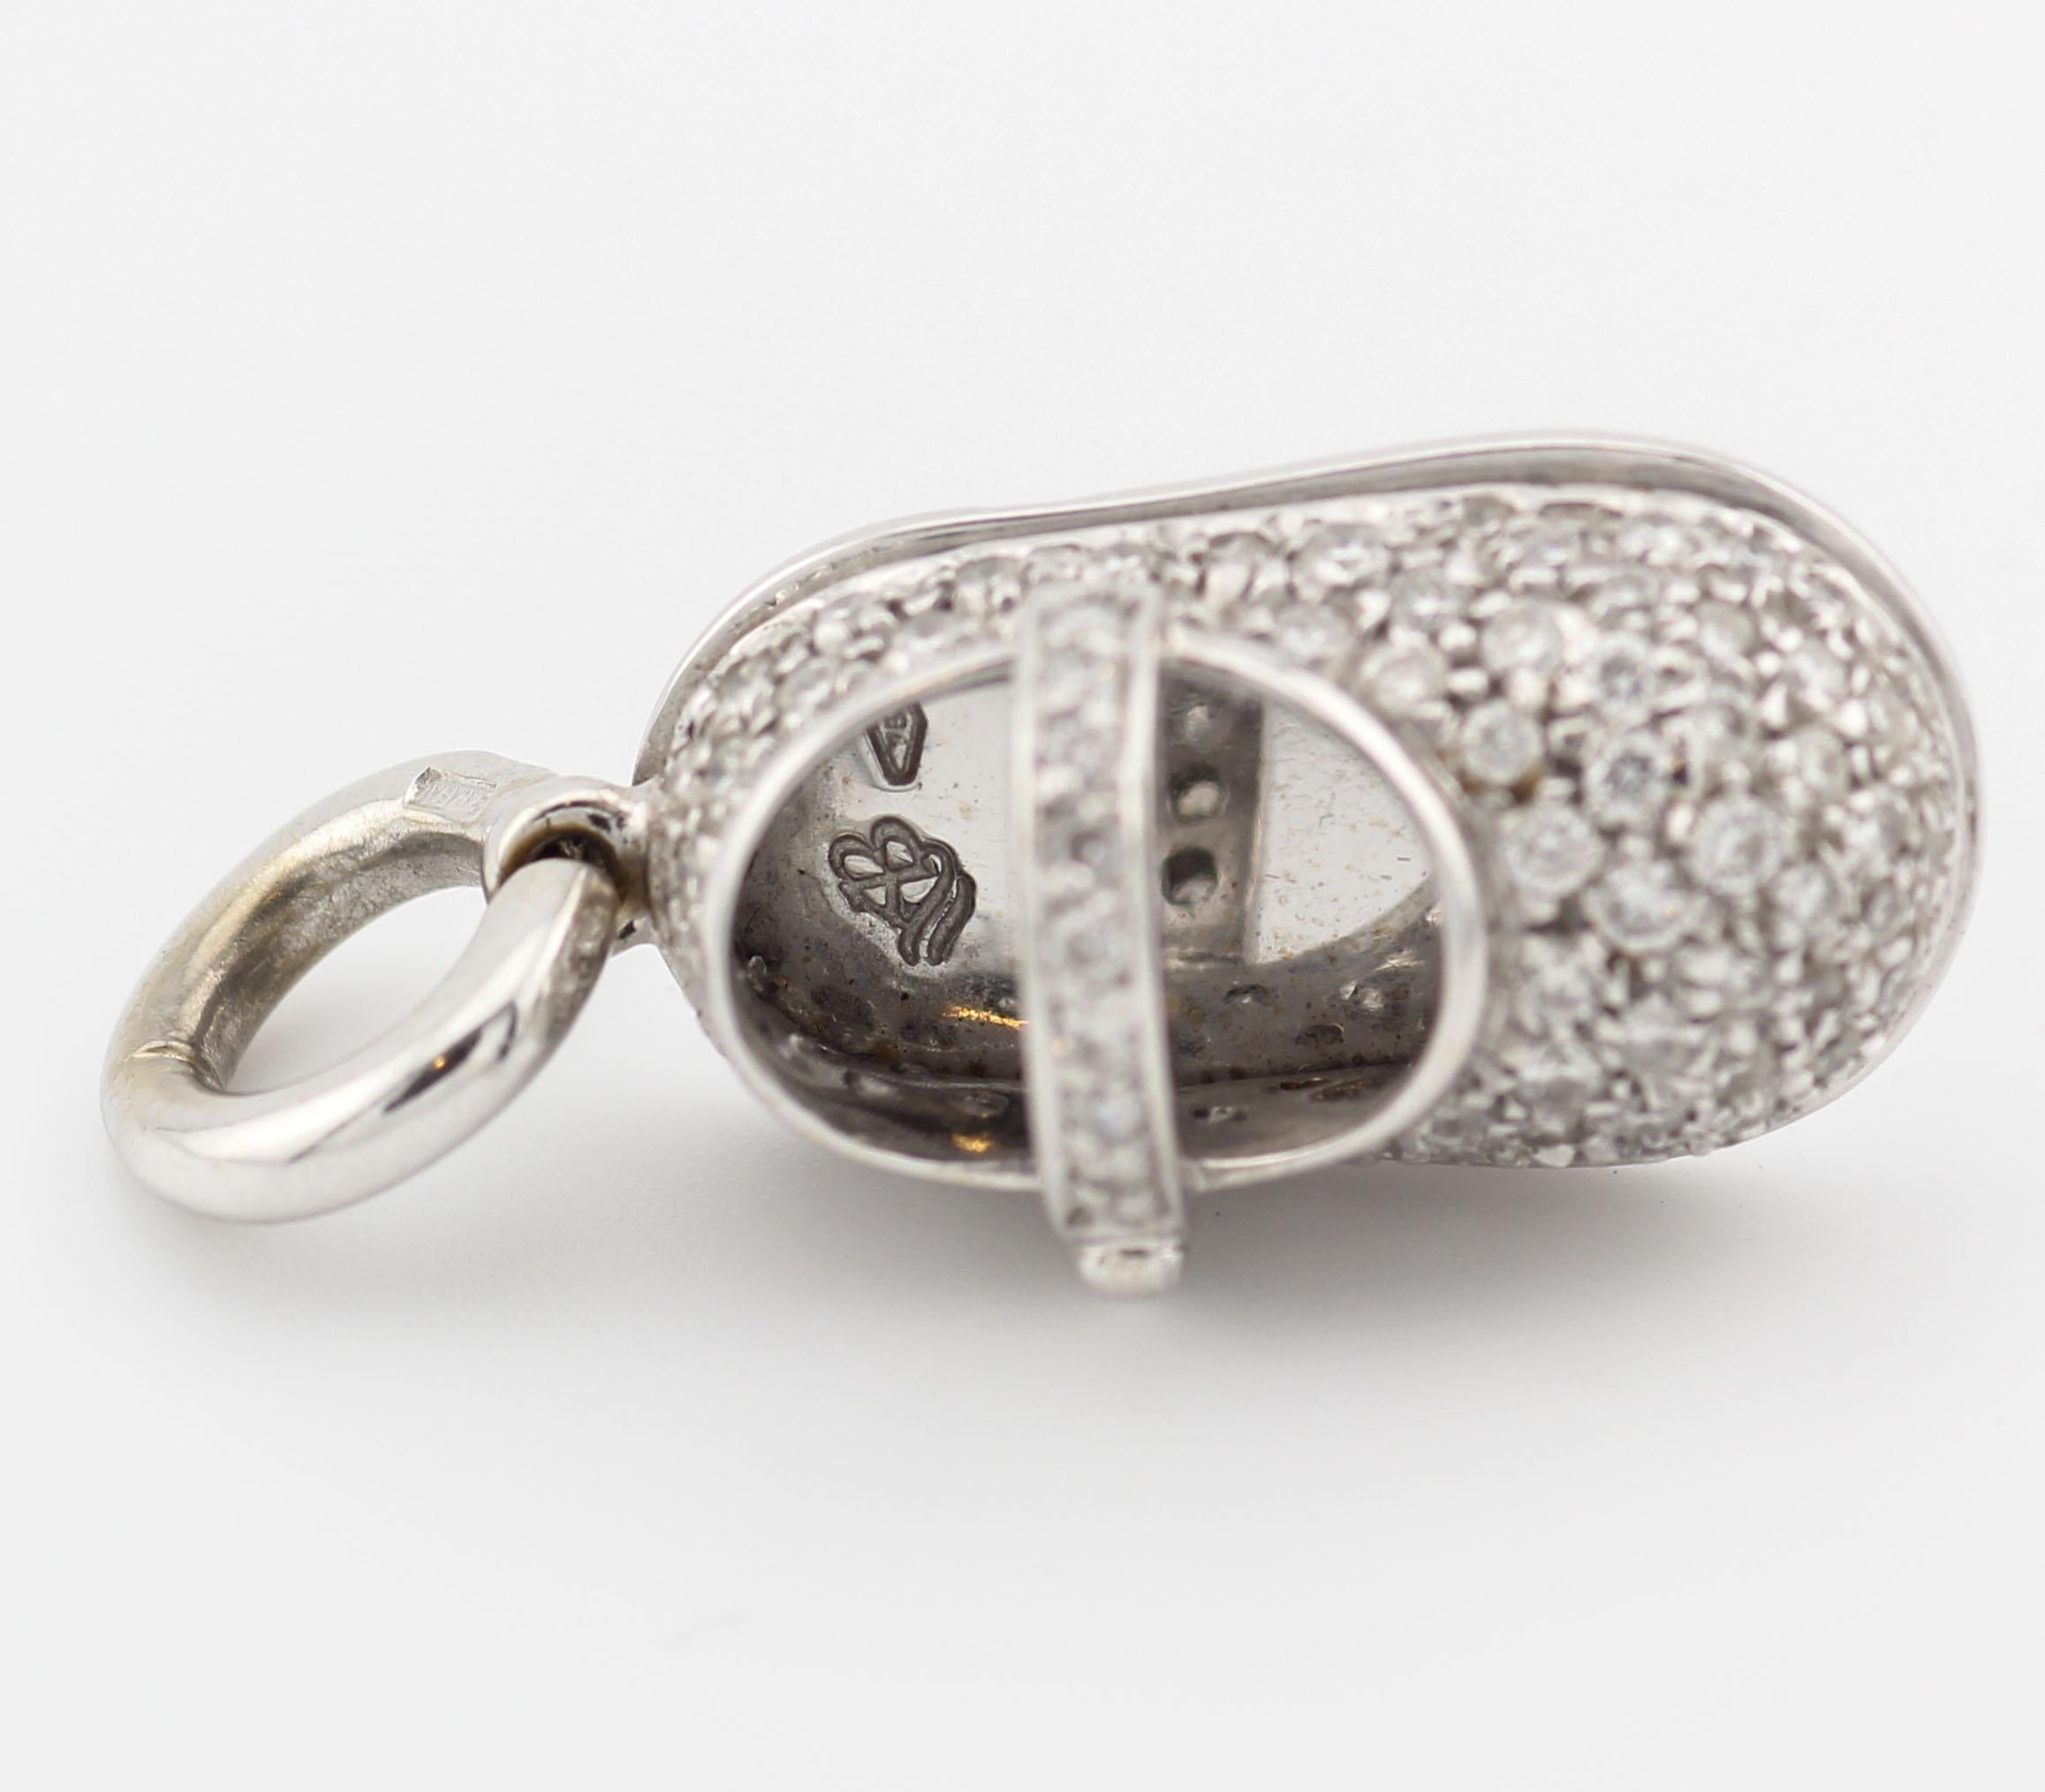 Introducing the Aaron Basha 18K White Gold and Diamonds Baby Shoe Charm Pendant, a symbol of precious beginnings, timeless elegance, and exceptional craftsmanship. This exquisite charm pendant is a delightful representation of the renowned Aaron